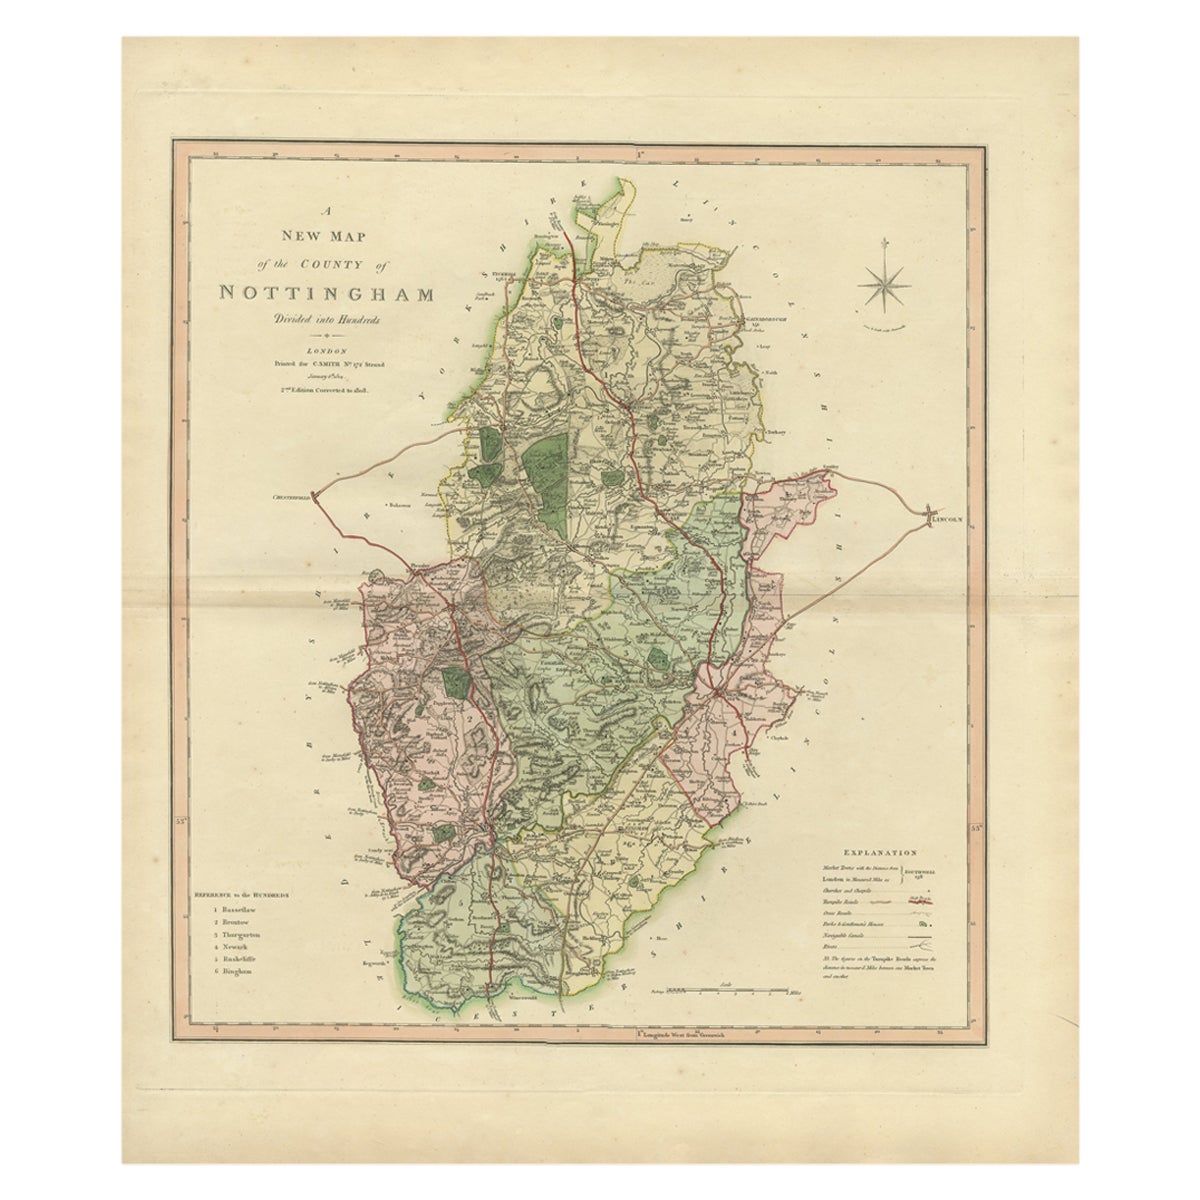 Antique Decorative Map of The County of Nottinghamshire, England, 1804